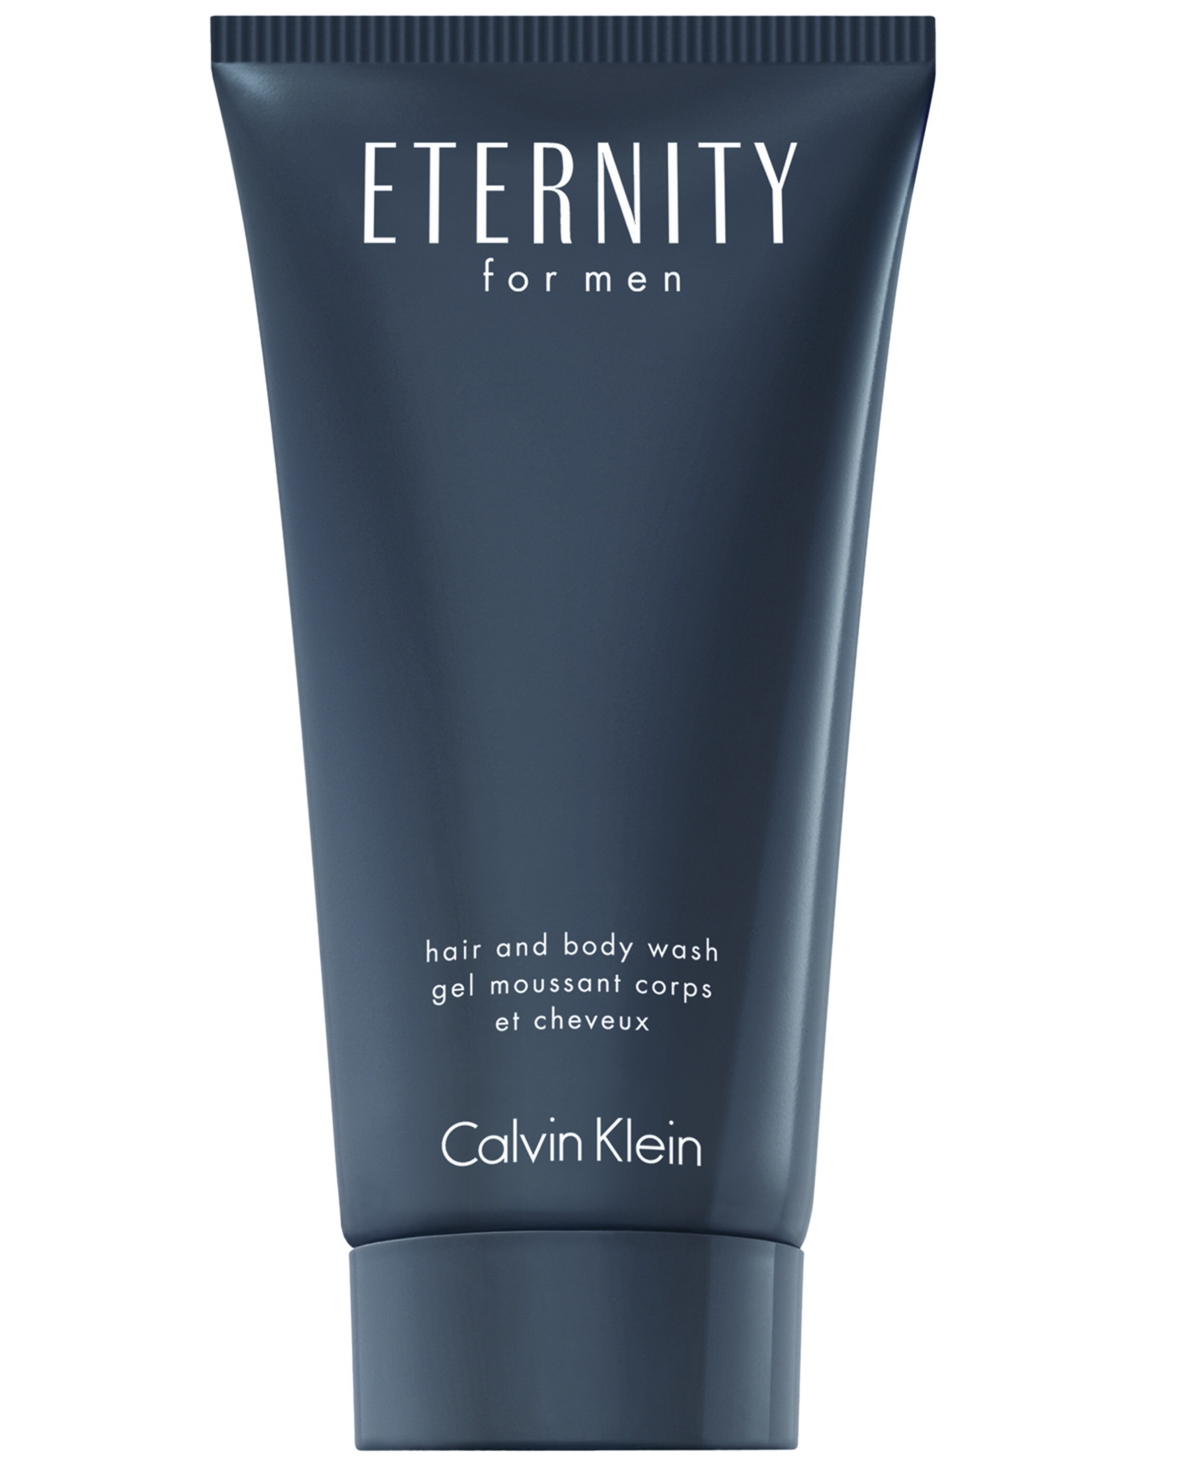 Eternity for Men Hair and Body Wash, 6.7 oz